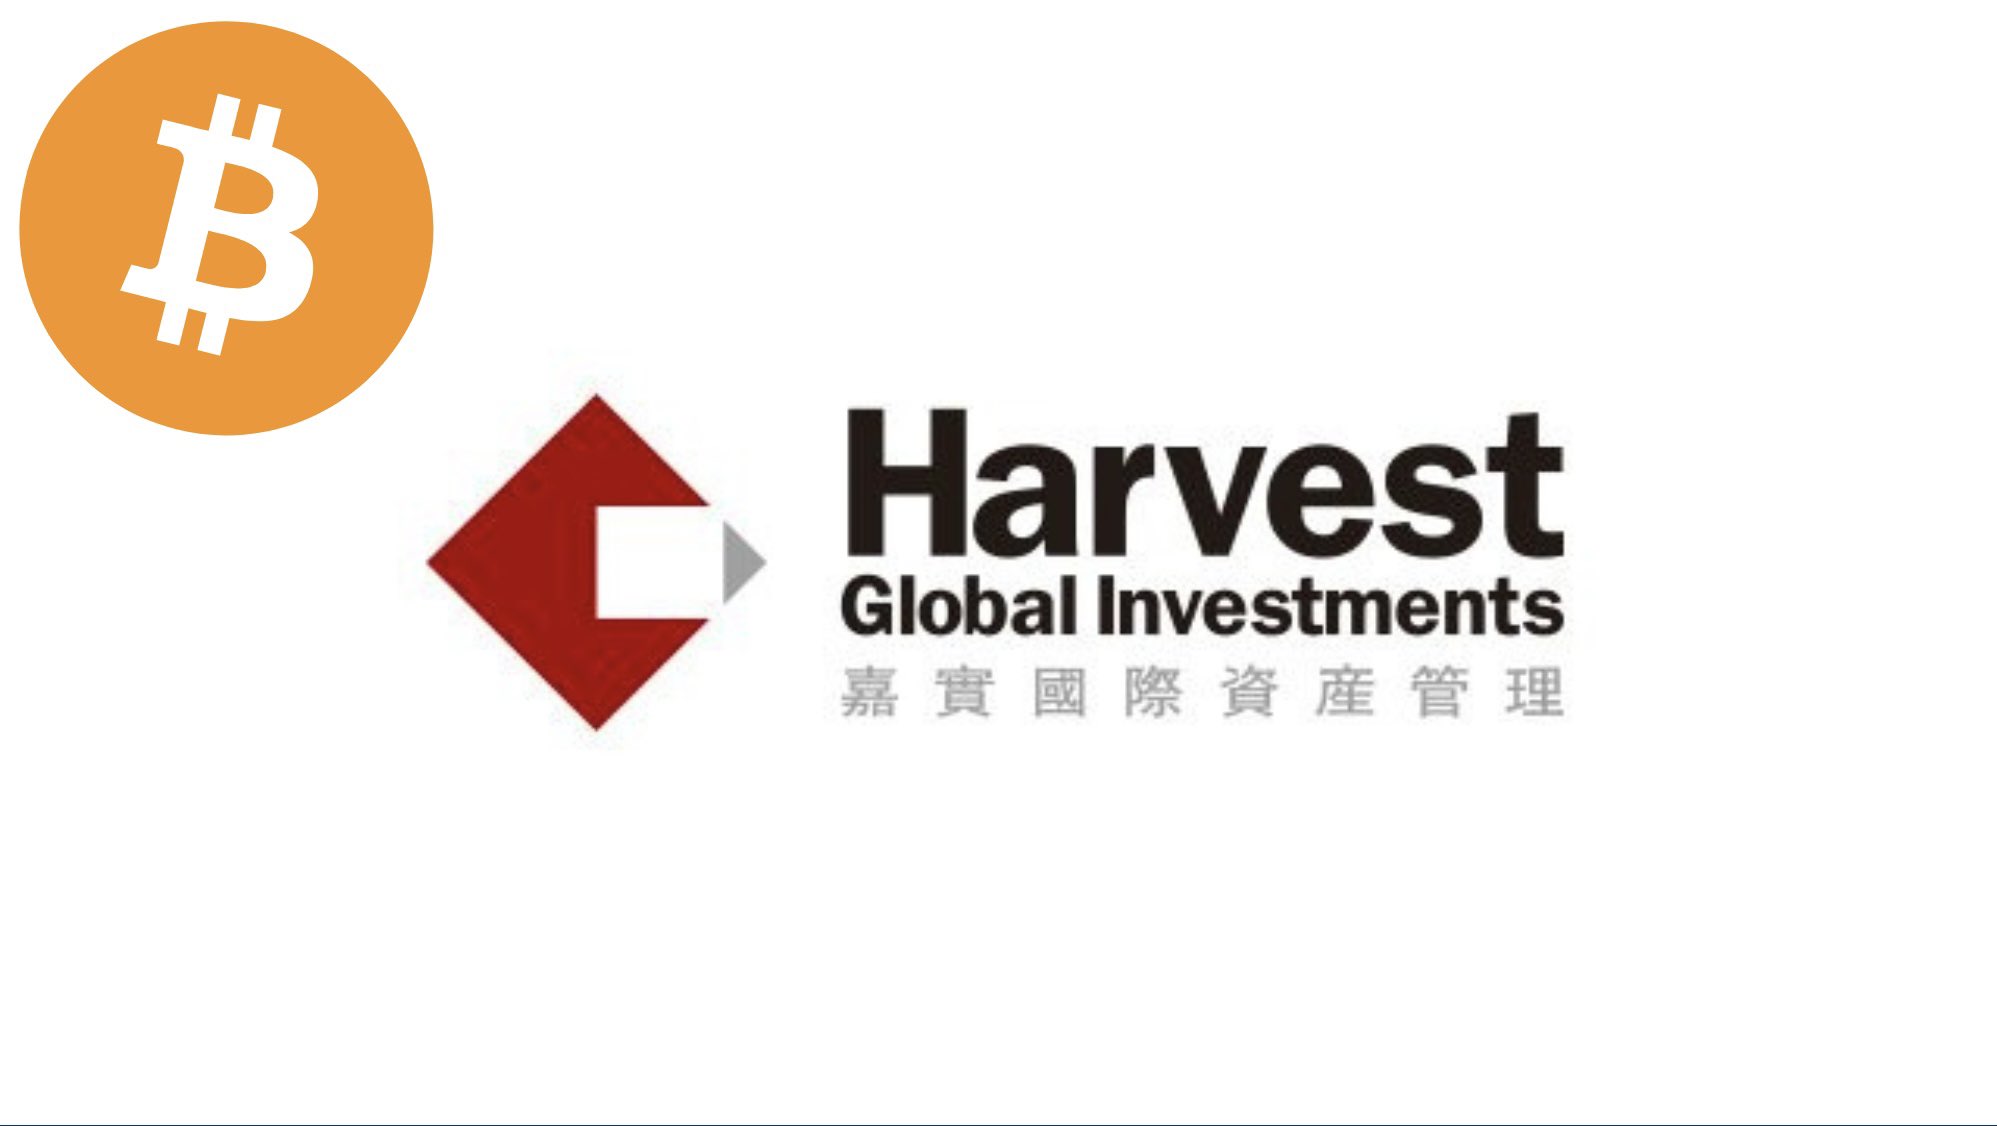 Harvest became the first Crypto ETF in HK at the end of April and this partnership with MetaComp will now open this ETF up to Singaporeans.